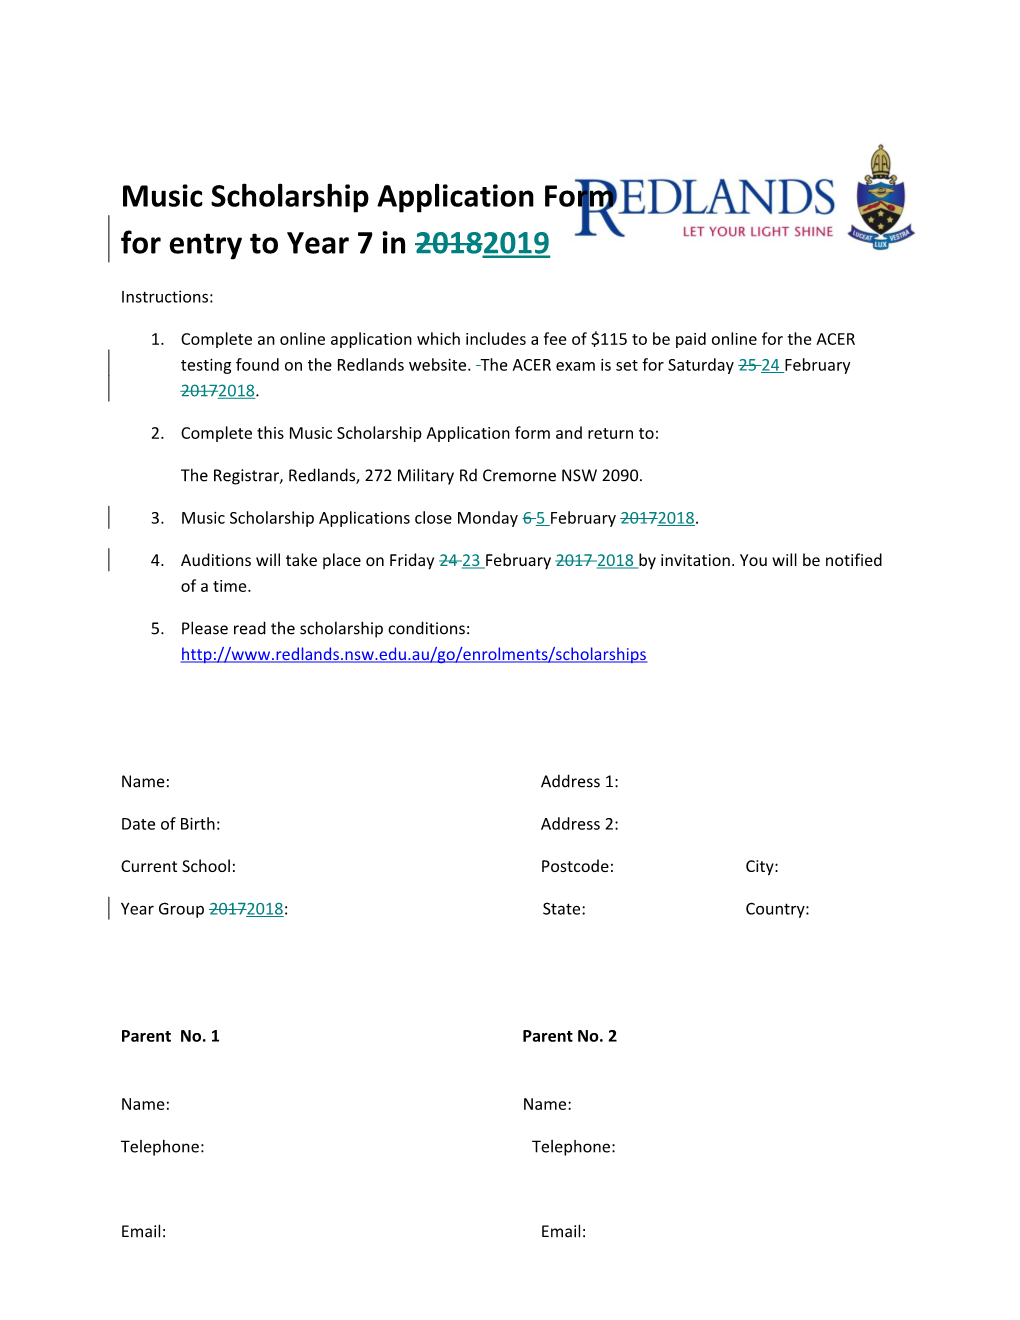 Music Scholarship Application Form for Entry to Year 7 in 20182019